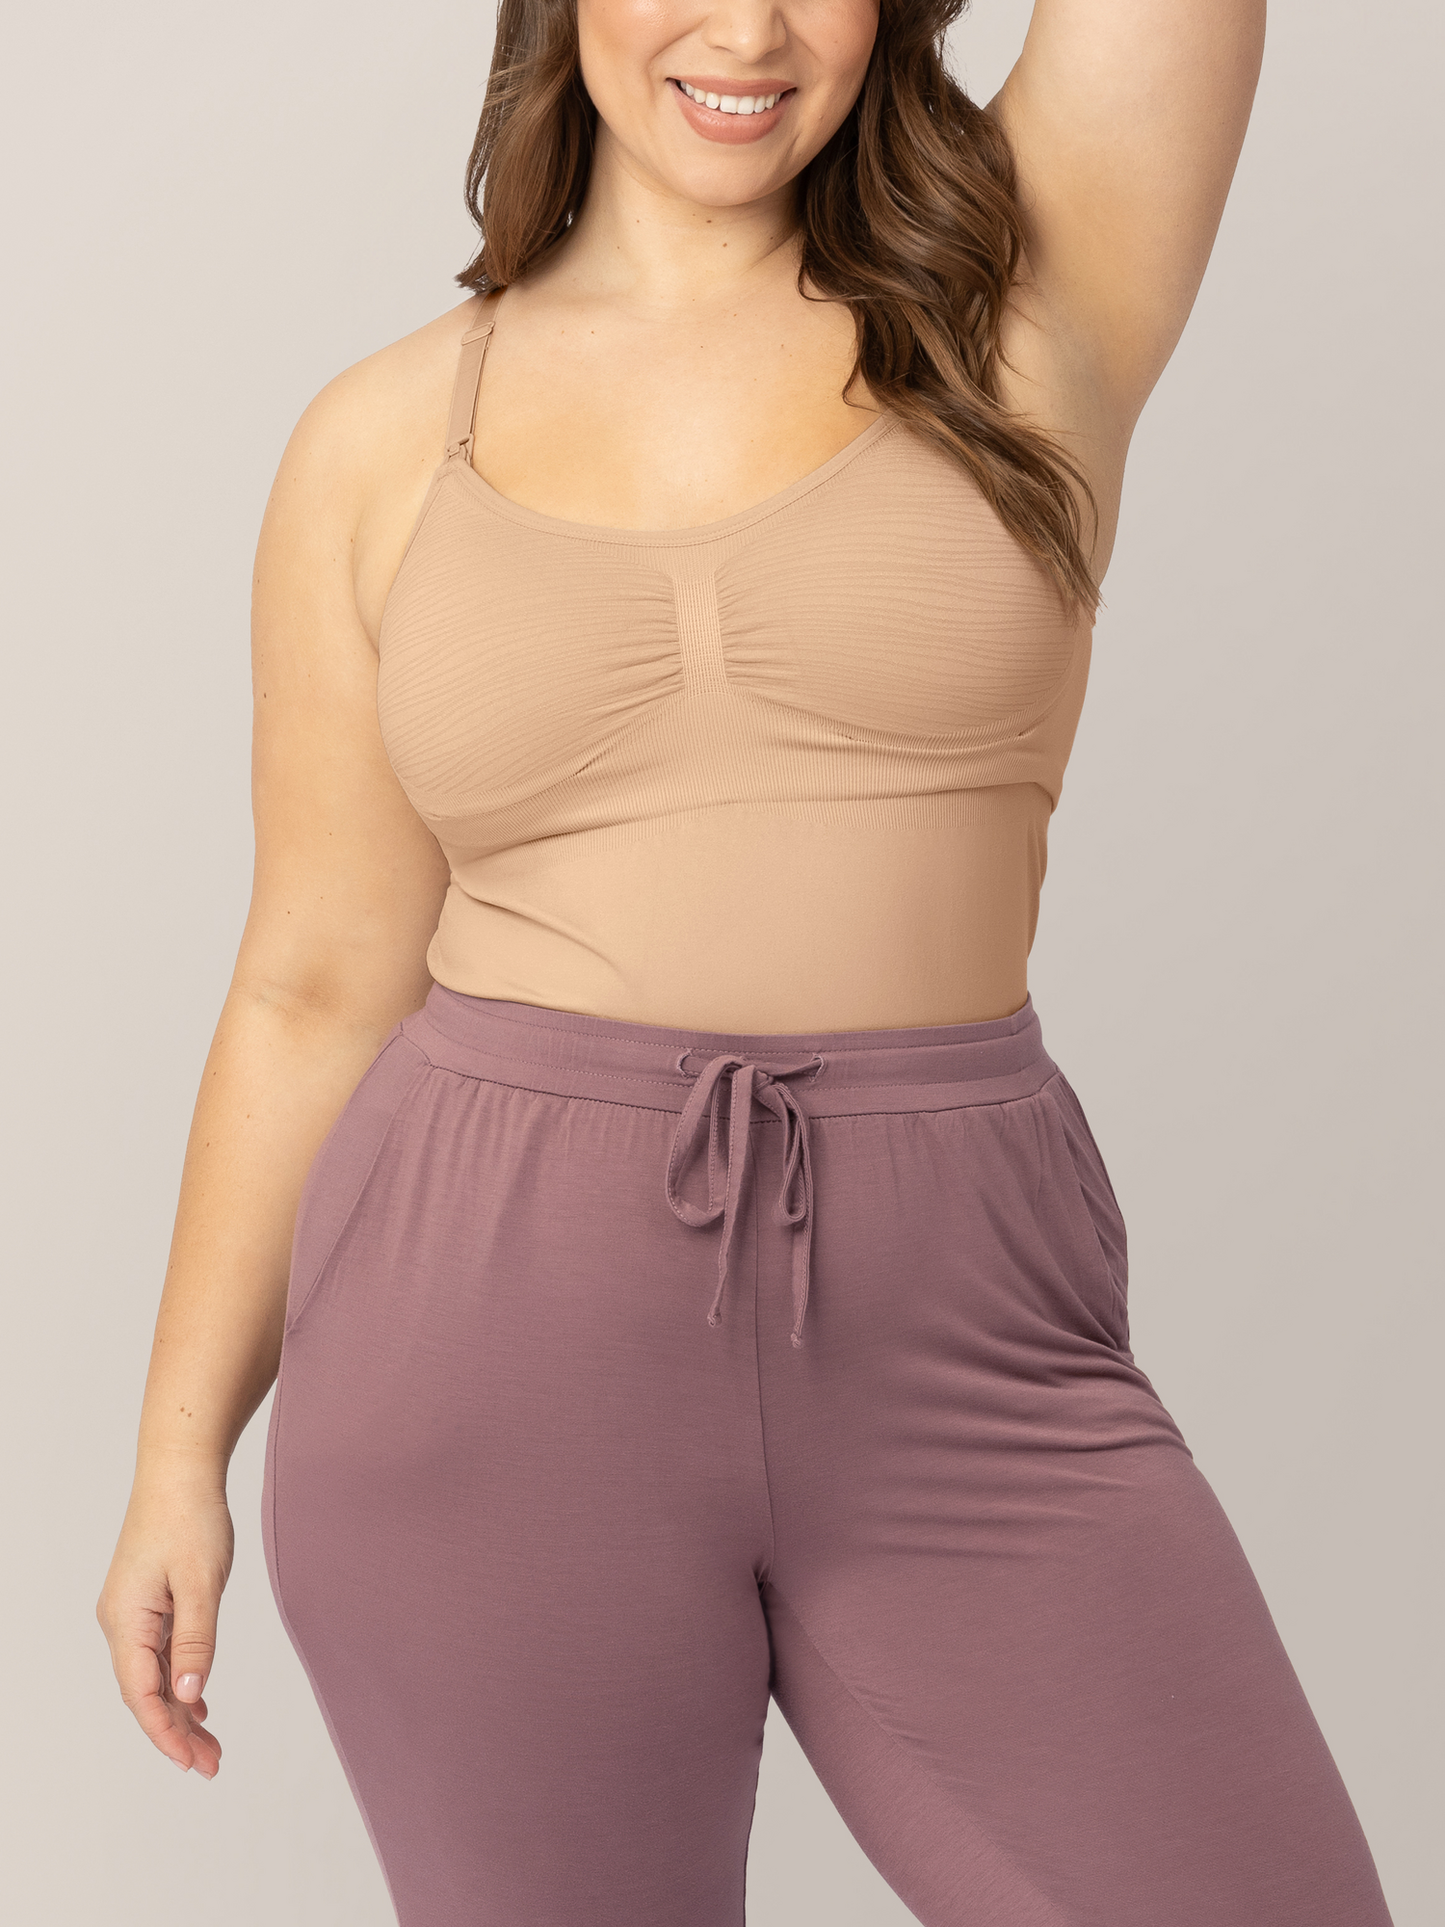 Closeup of the Sublime® Hands-Free Pumping & Nursing Tank in Beige tucked into sweatpants.